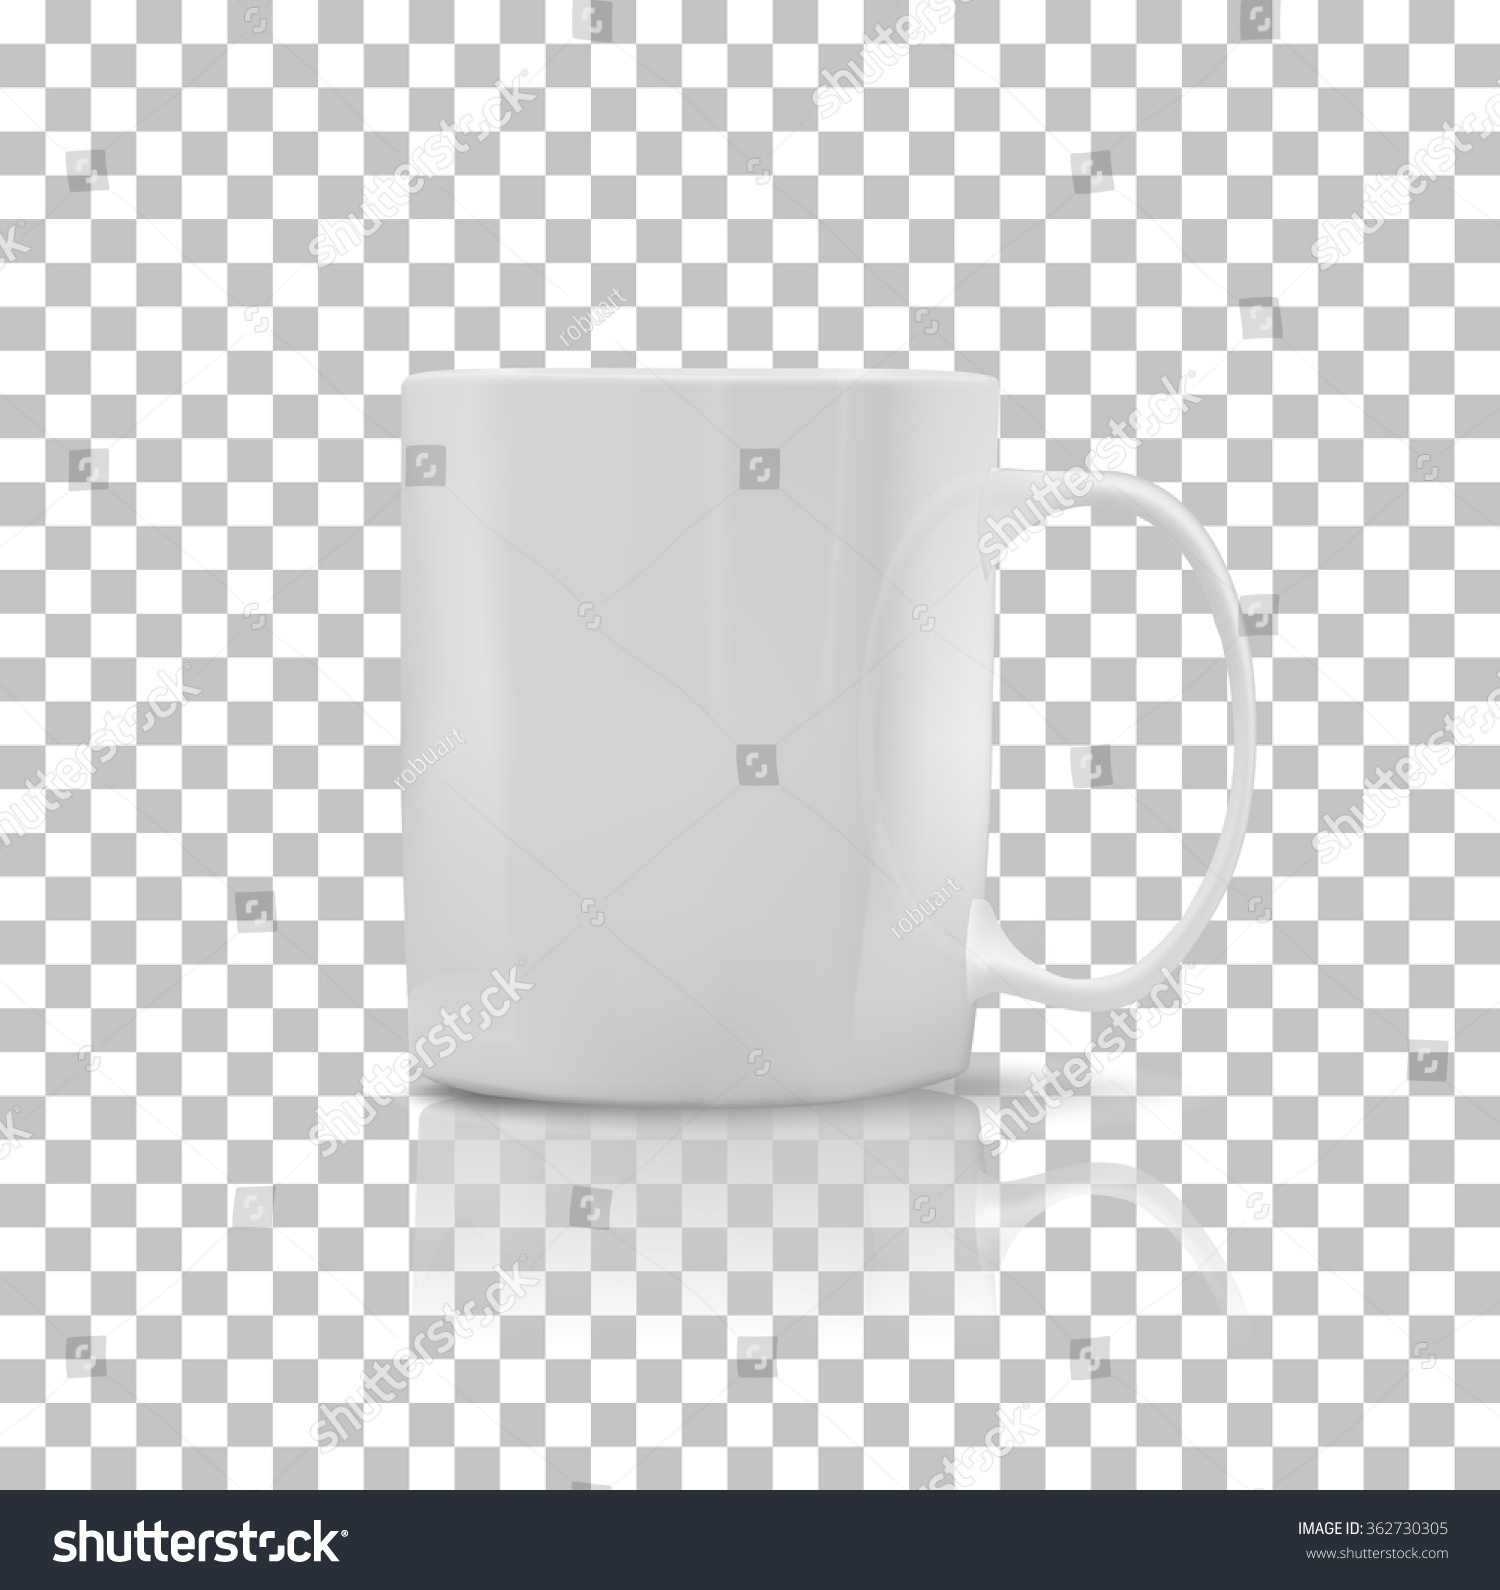 Cup or mug white color. Object coffee or tea, ceramic utensil, beverage breakfast, refreshment caffeine, handle container, realistic glossy elegance cup. Cup icon. Transparent background #362730305